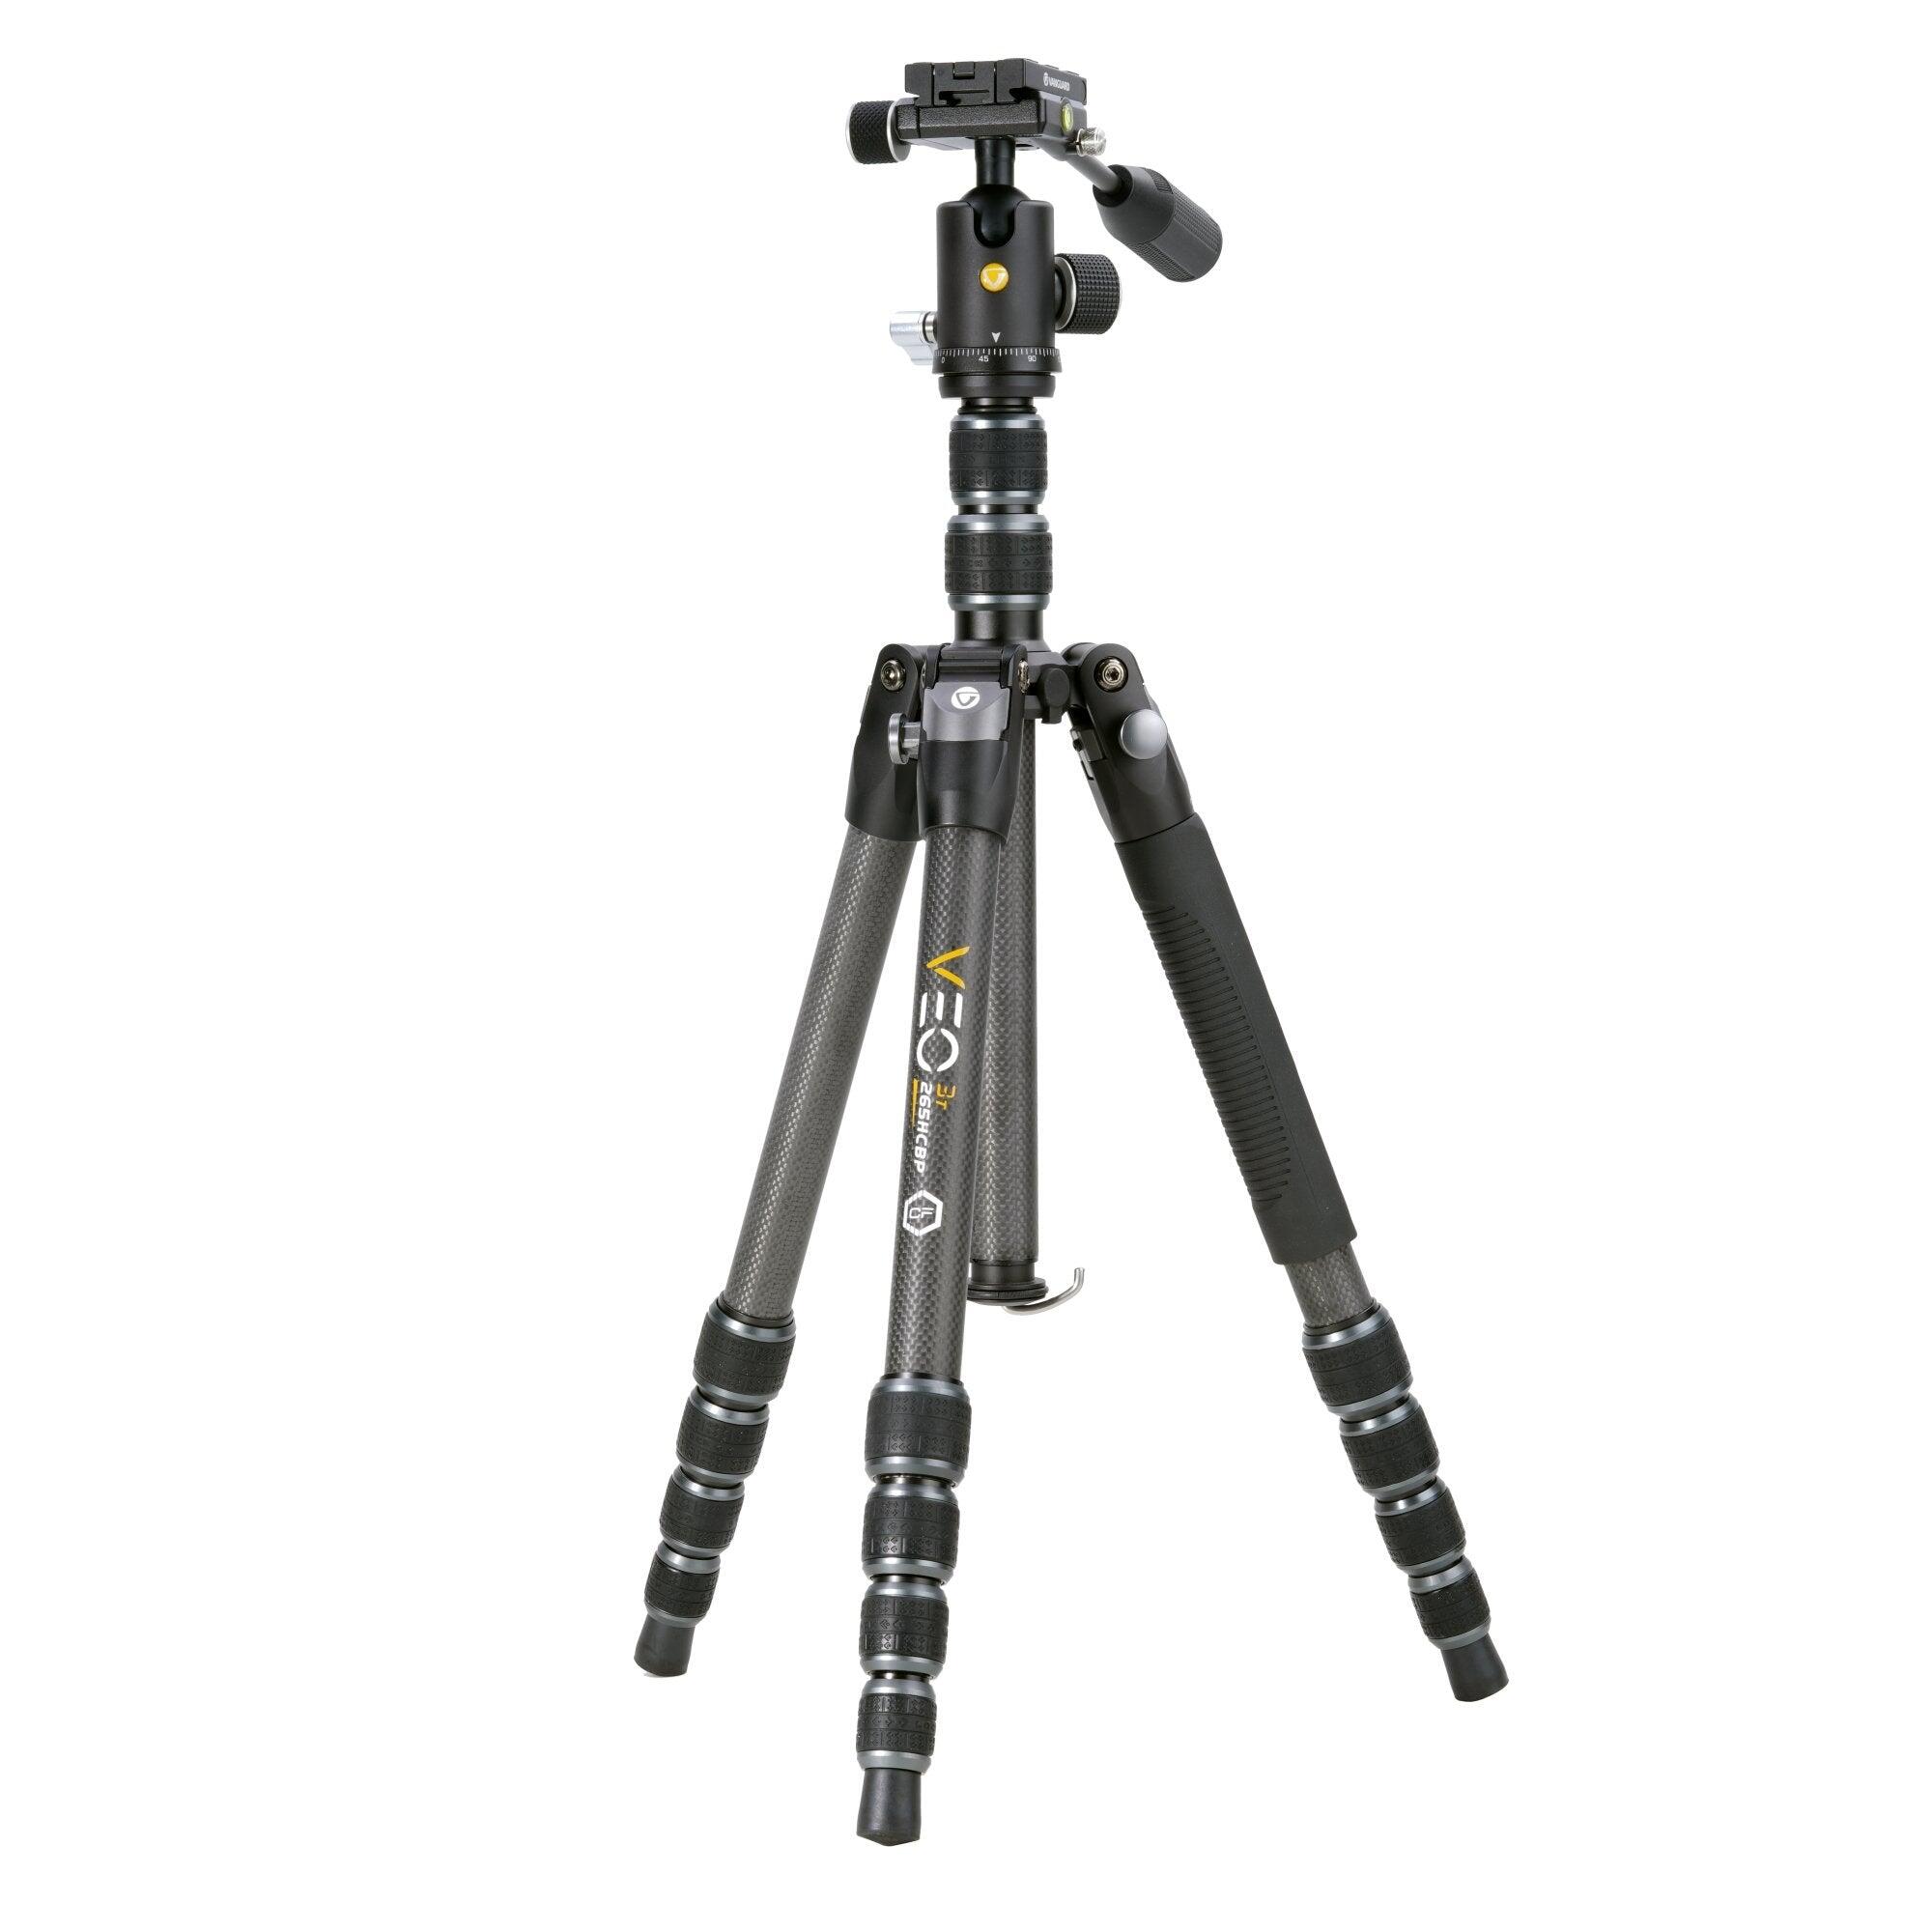 VEO 3T 265HCBP Tall Carbon Travel Tripod with Ball/Pan Head - 12kg Max Load 1/5